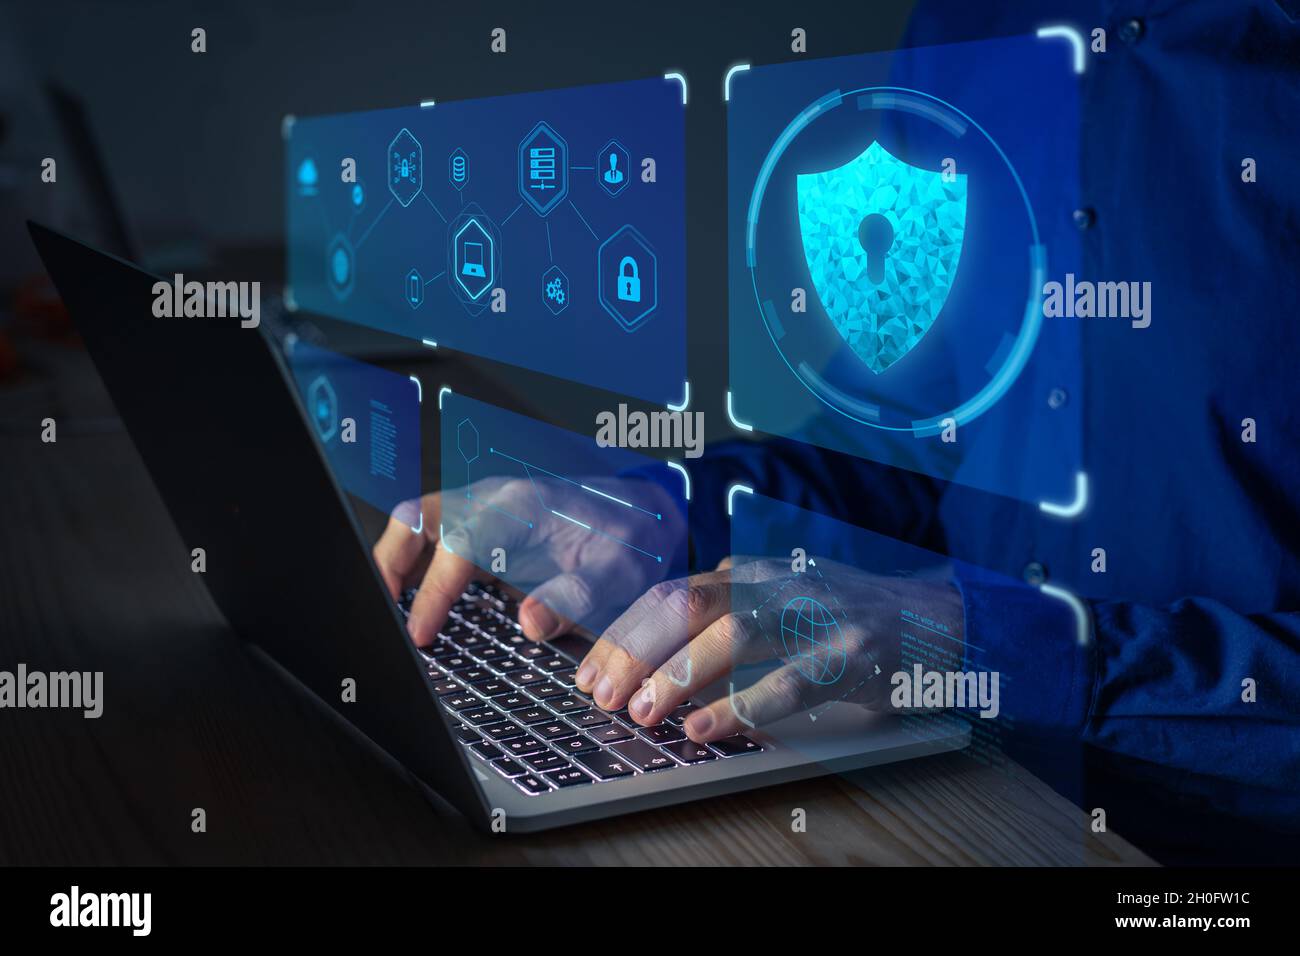 Cyber security expert working on network and data protection on laptop computer against digital crime. Privacy technology on internet. Stock Photo